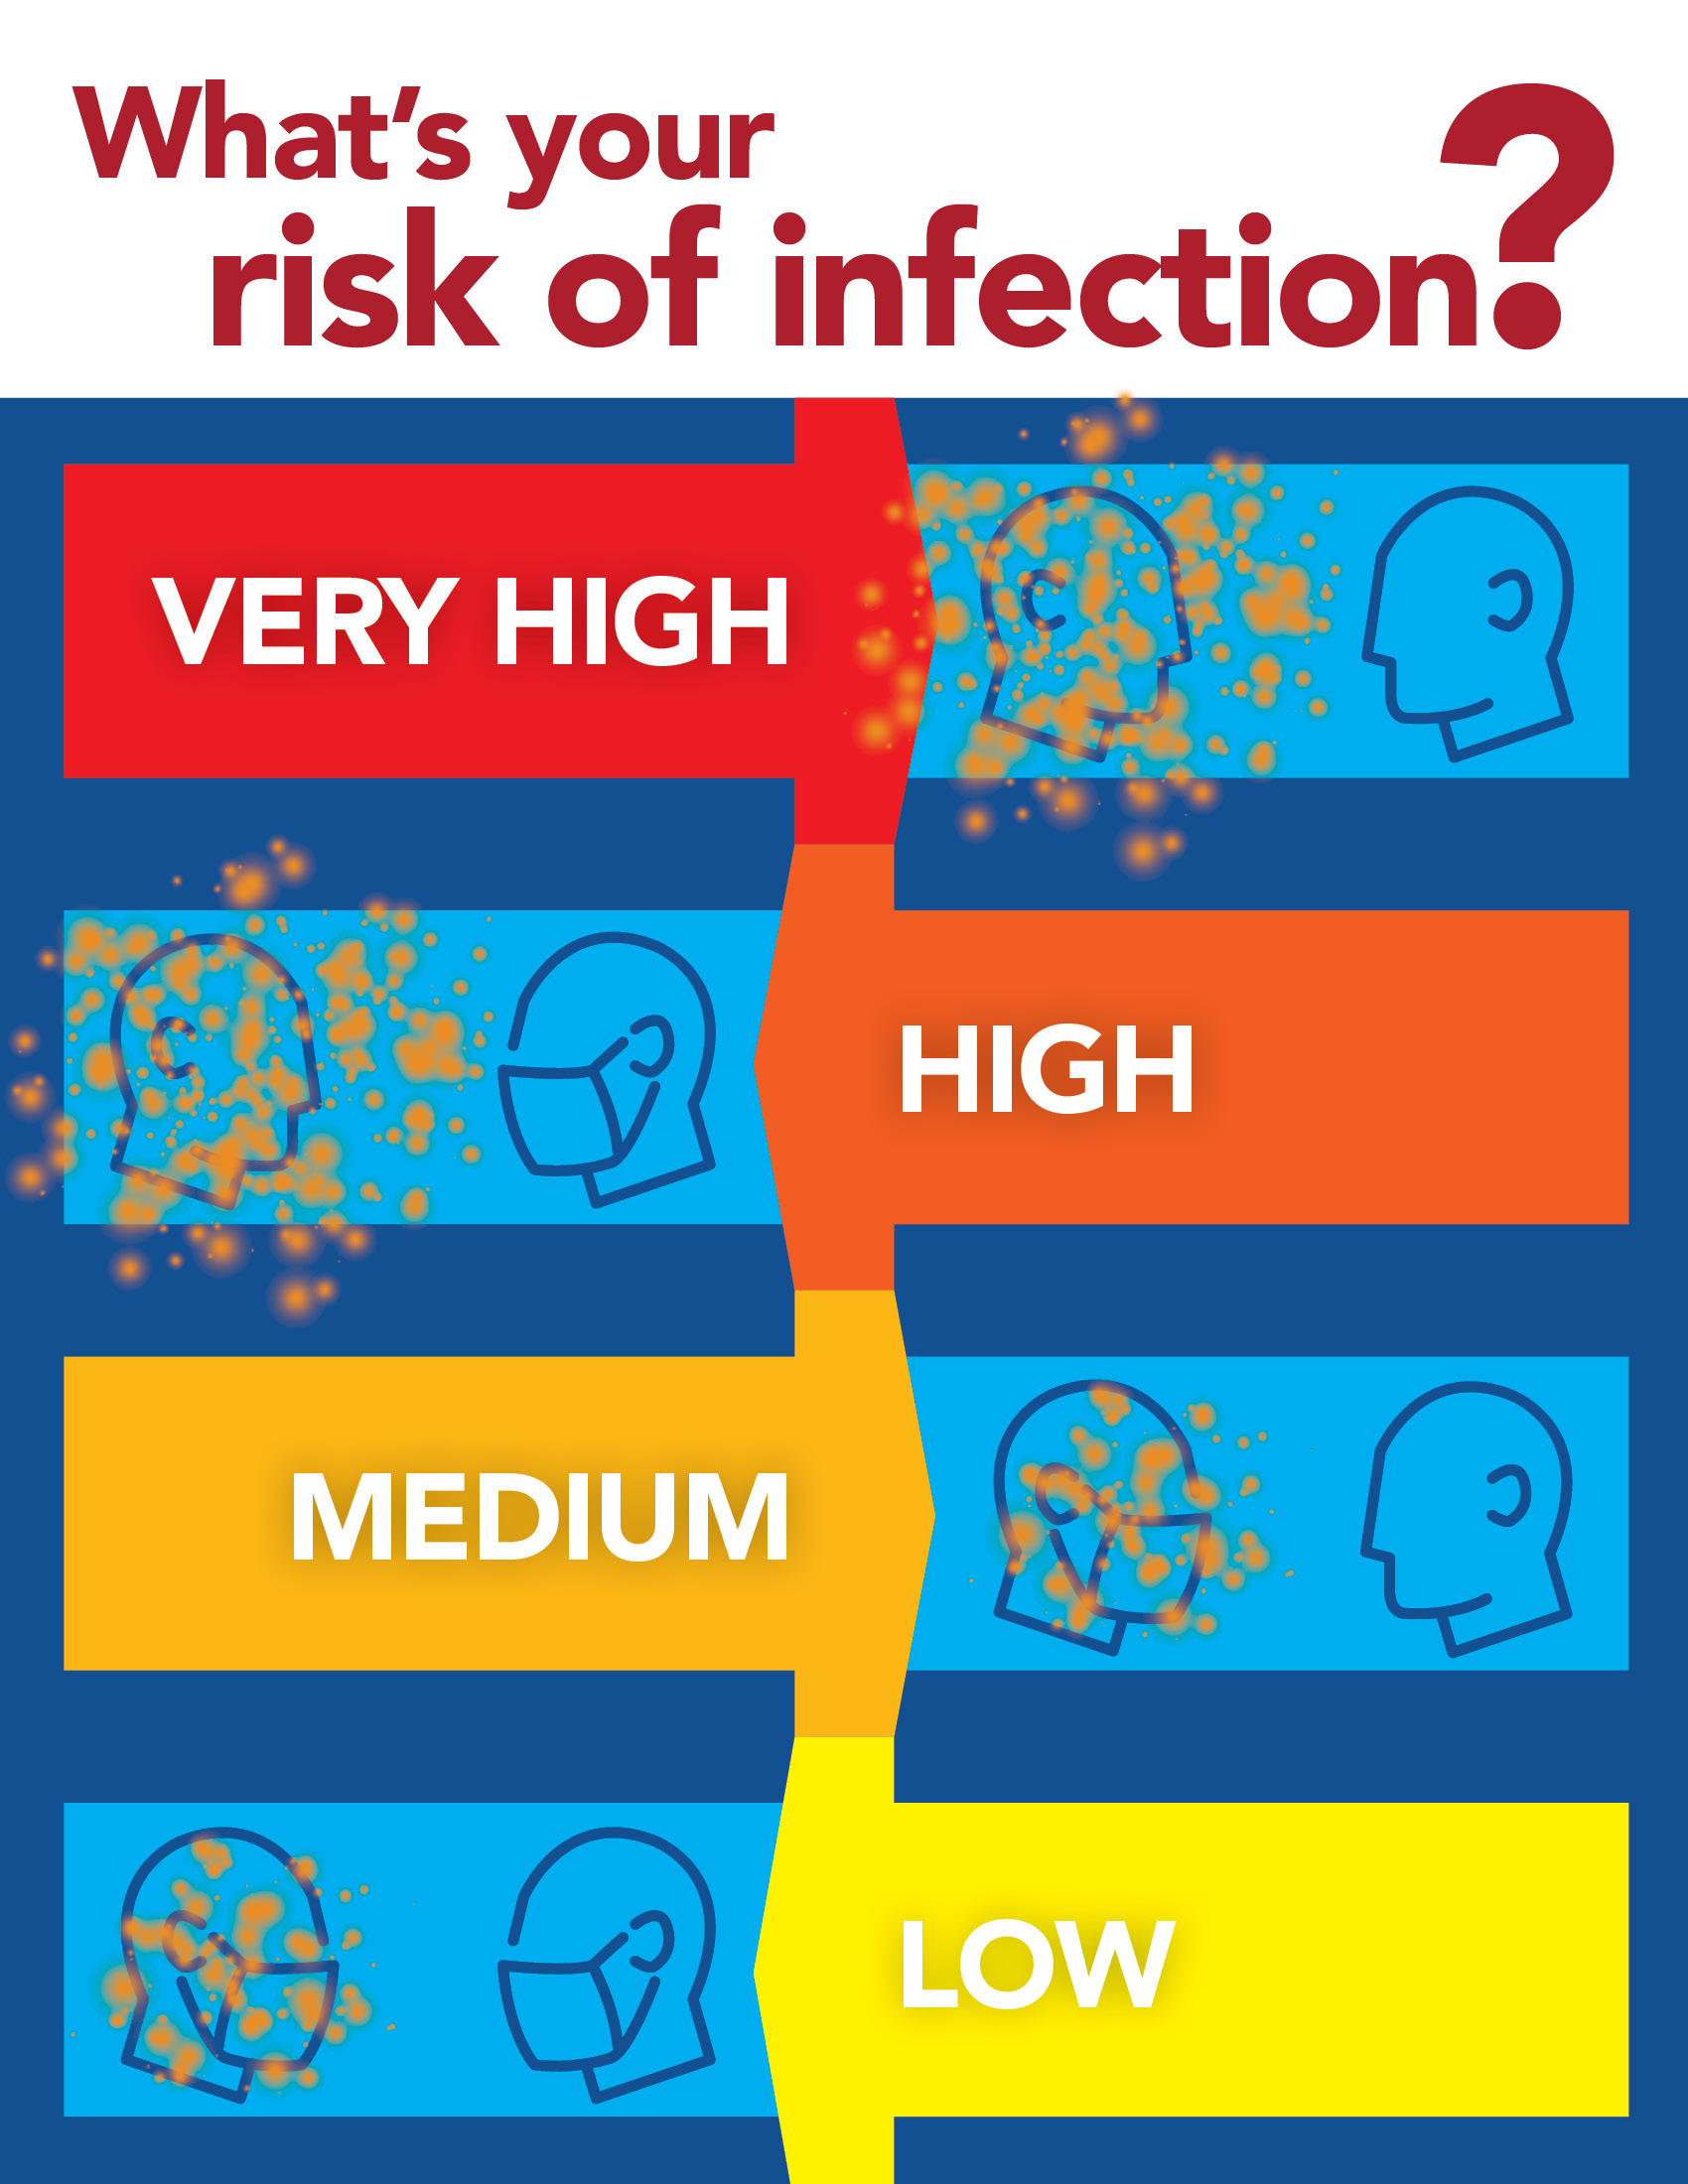 What's your risk of infection?